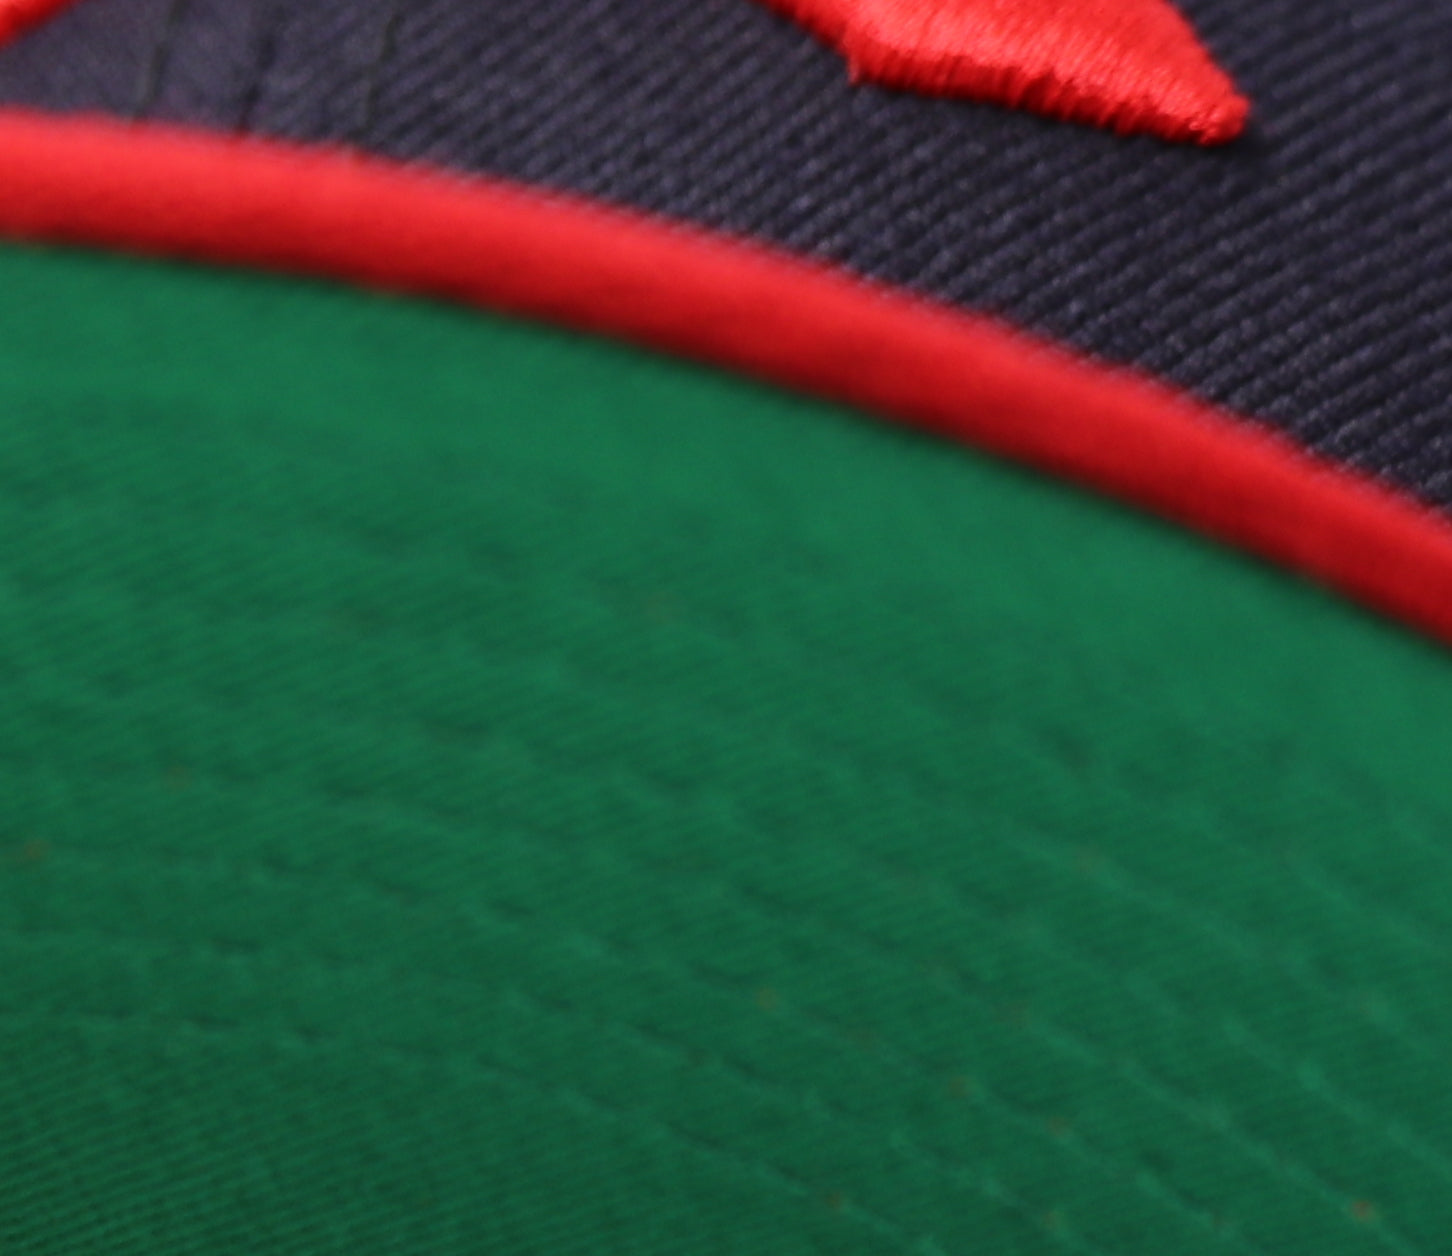 CLEVELAND INDIANS (1948 WORLDSERIES) NEW ERA 59FIFTY FITTED (GREEN BOTTOM)